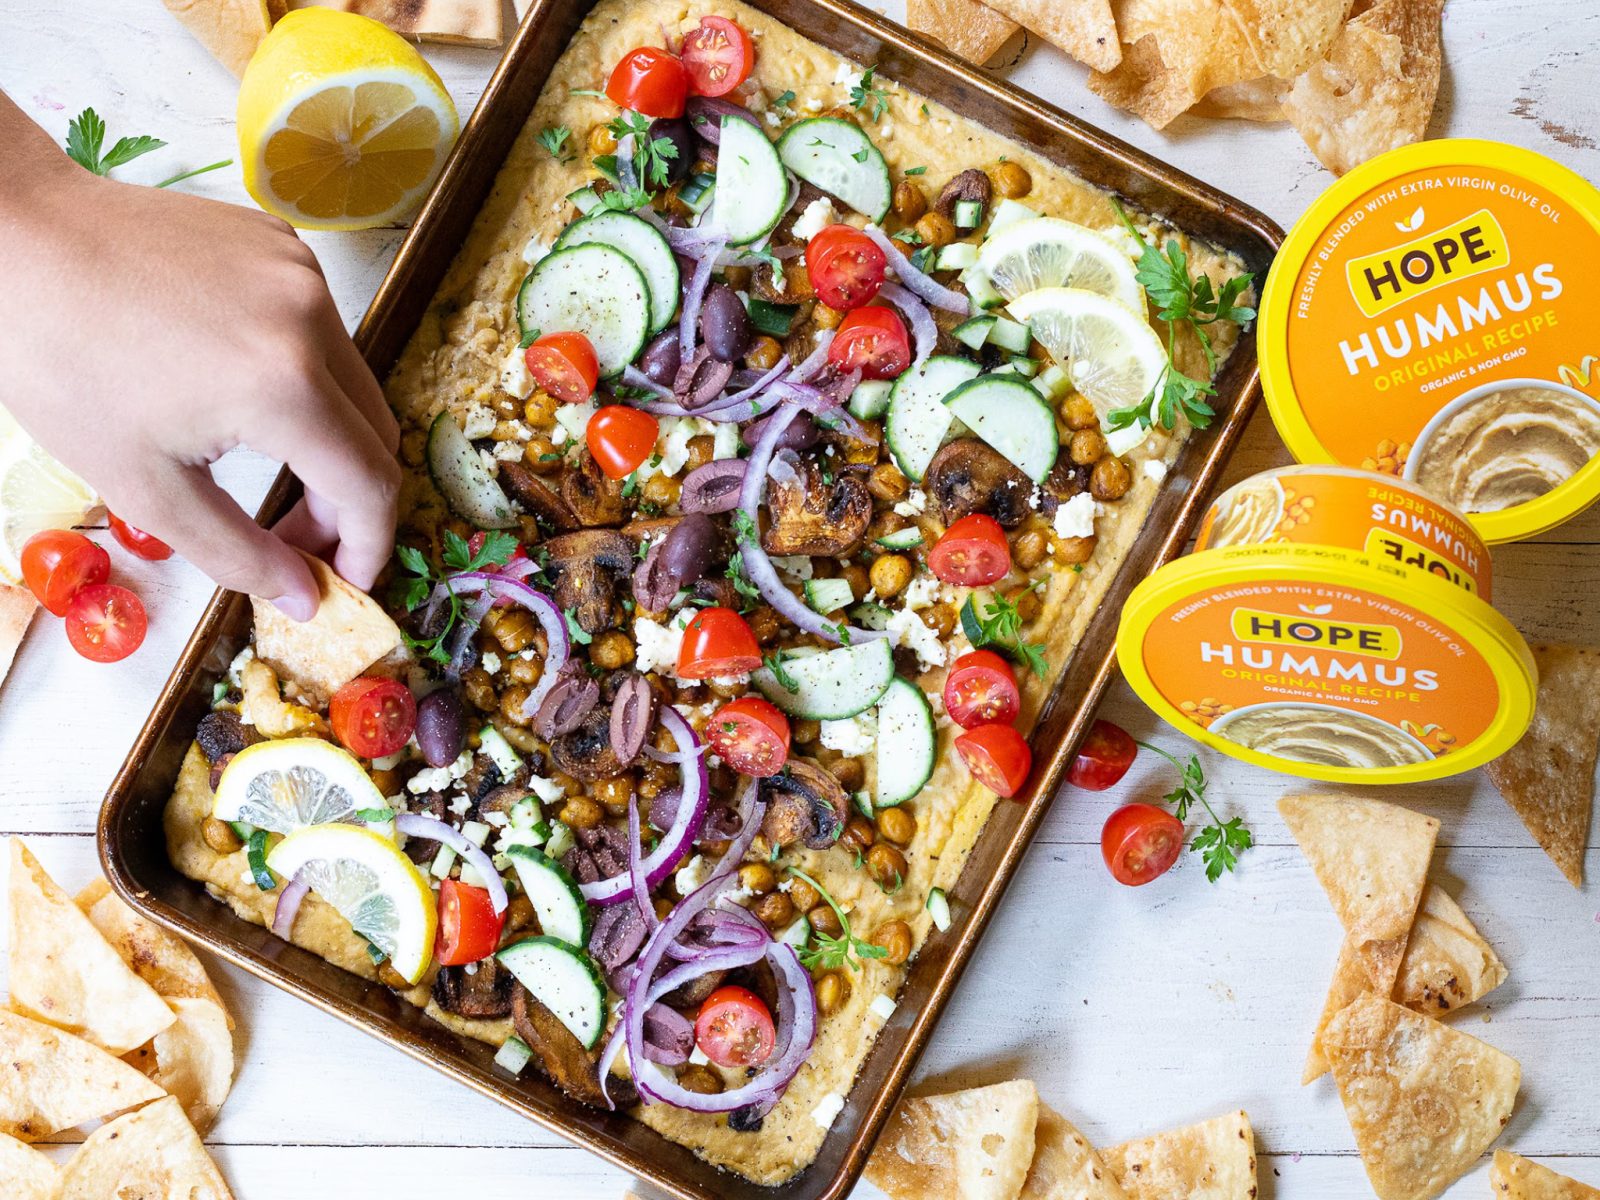 Serve Up A Tasty Baked Hummus Dip With HOPE Hummus – Get Everything You Need At Publix